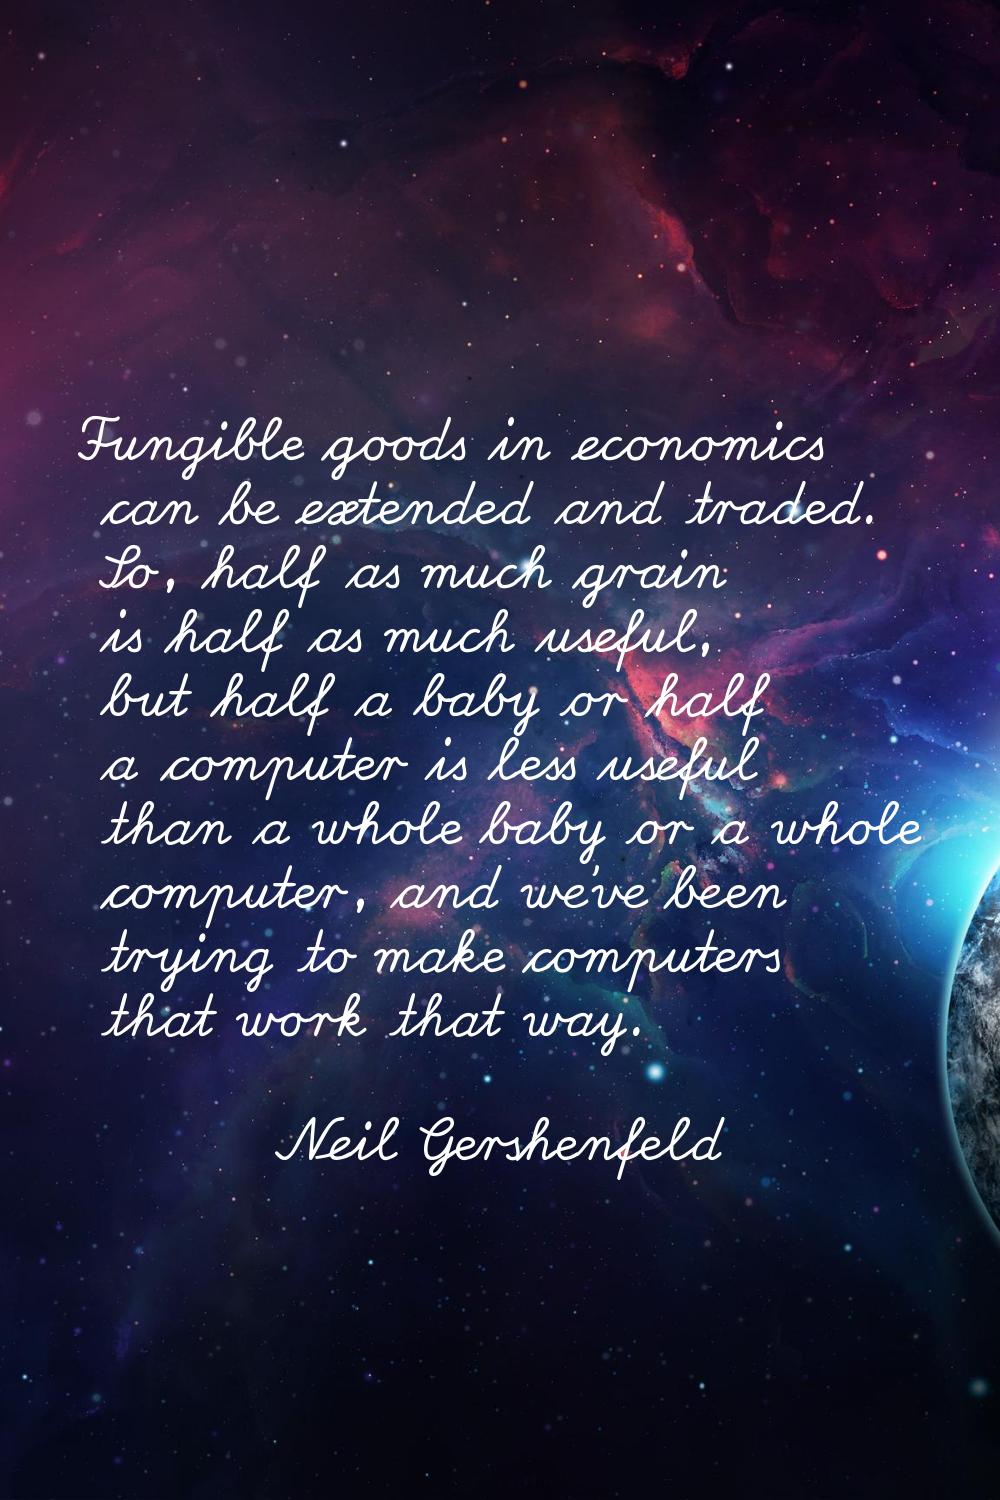 Fungible goods in economics can be extended and traded. So, half as much grain is half as much usef